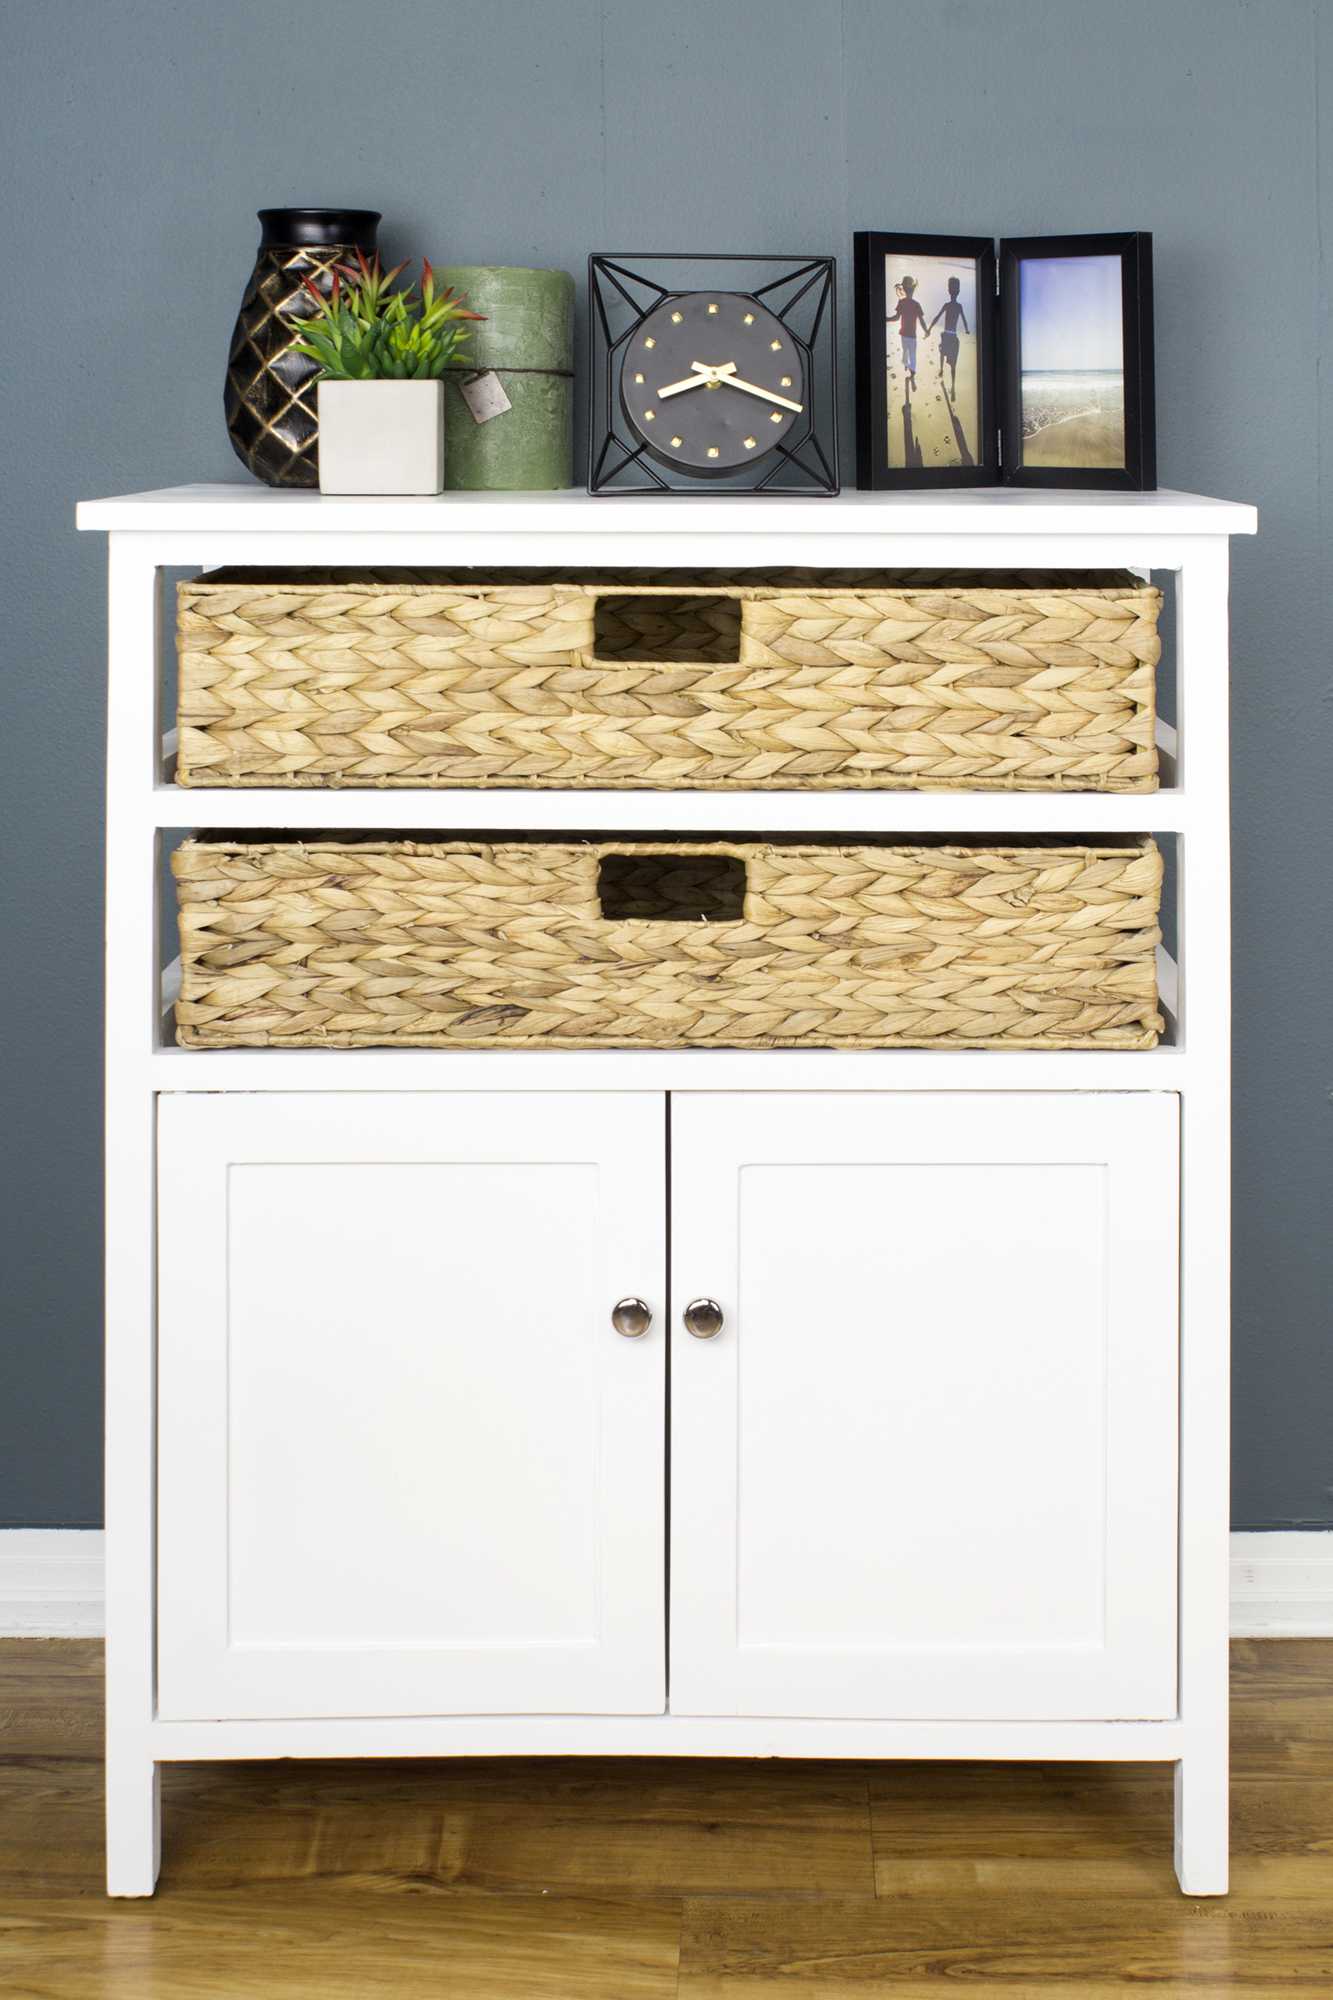 26.5" X 15" X 31.5" White Wood MDF Water Hyacinth Water Hyacinth Basket a Door Accent Cabinet